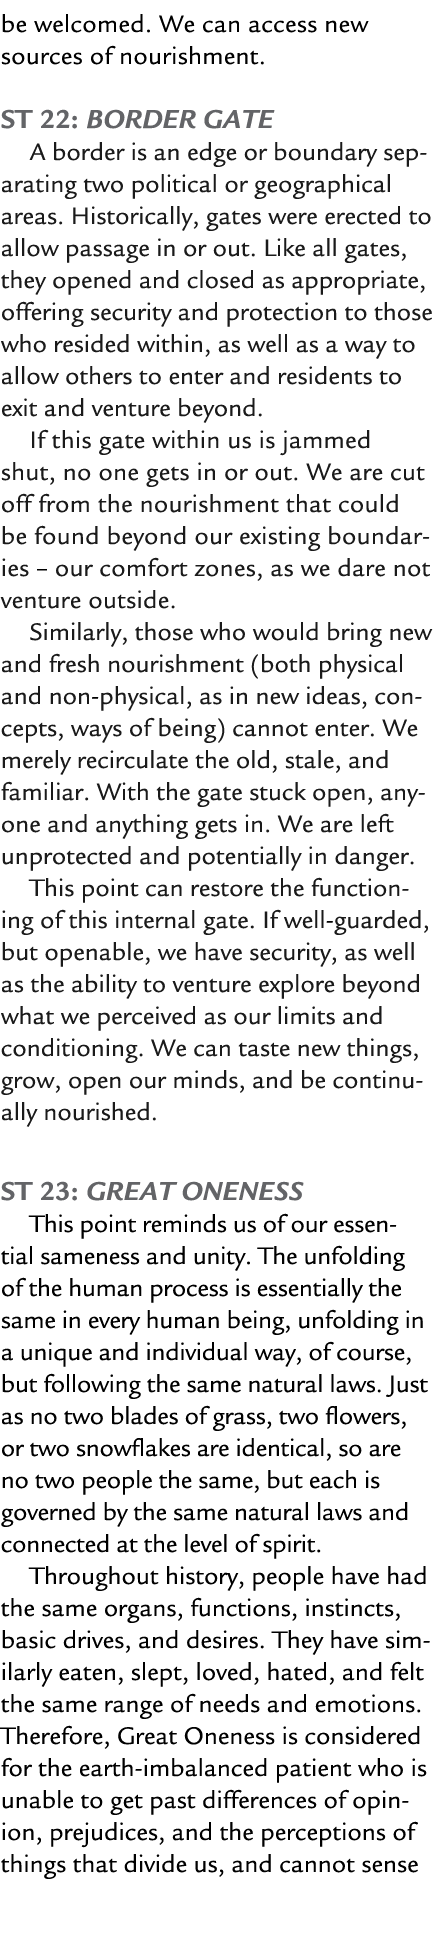 be welcomed. We can access new sources of nourishment. ST 22: Border Gate A border is an edge or boundary separating ...